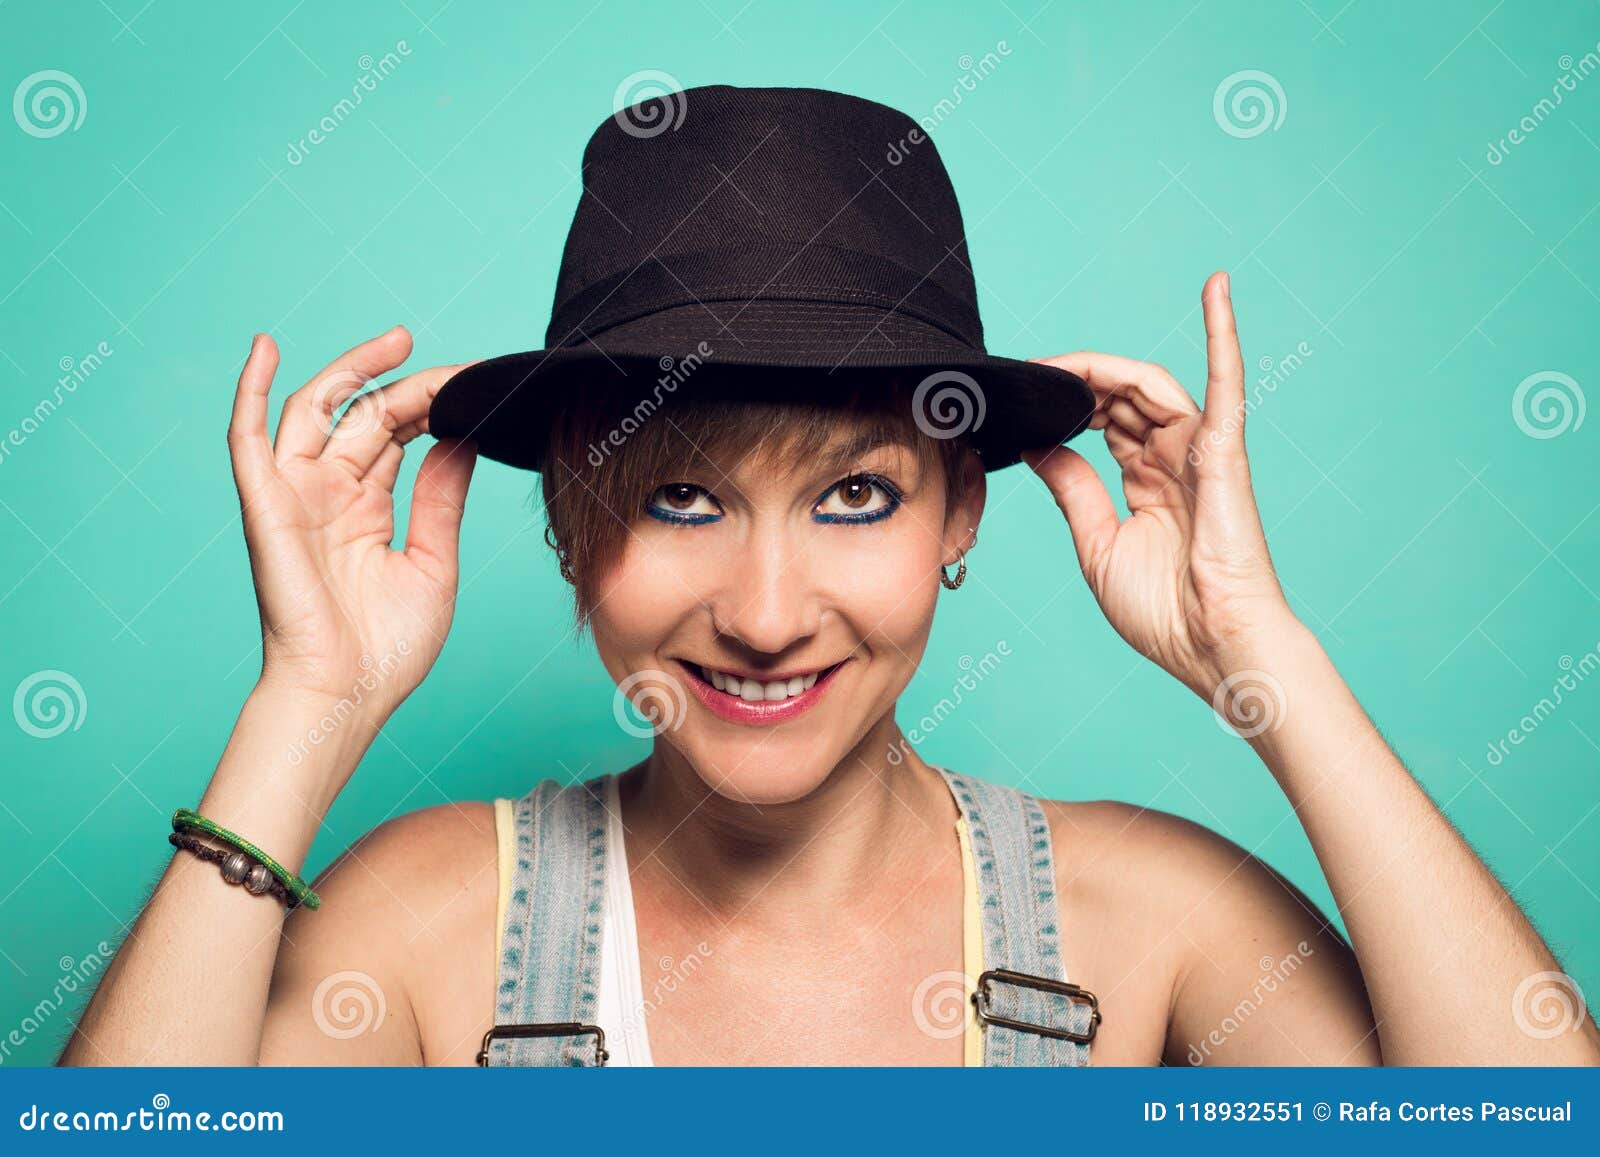 Pretty Girl with a Hat and a Positive Attitude Stock Image - Image of ...